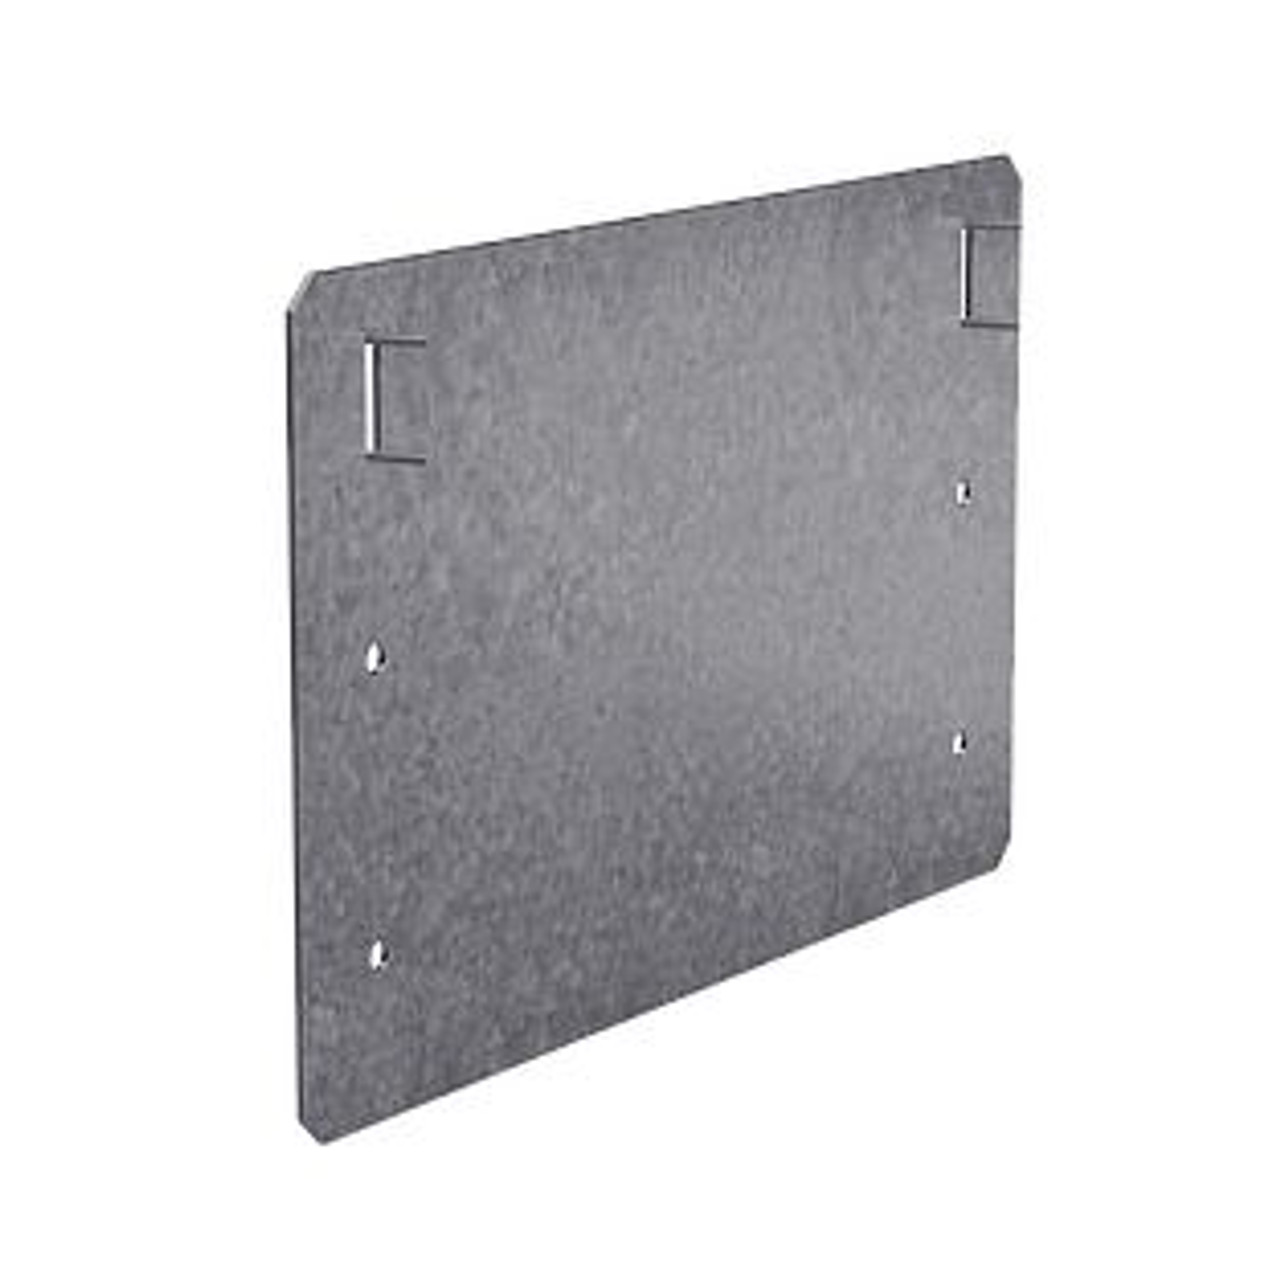 Simpson Strong-Tie PSPN58Z 5 x 8-Inch Protecting Shield Plate ZMAX 25 Pk